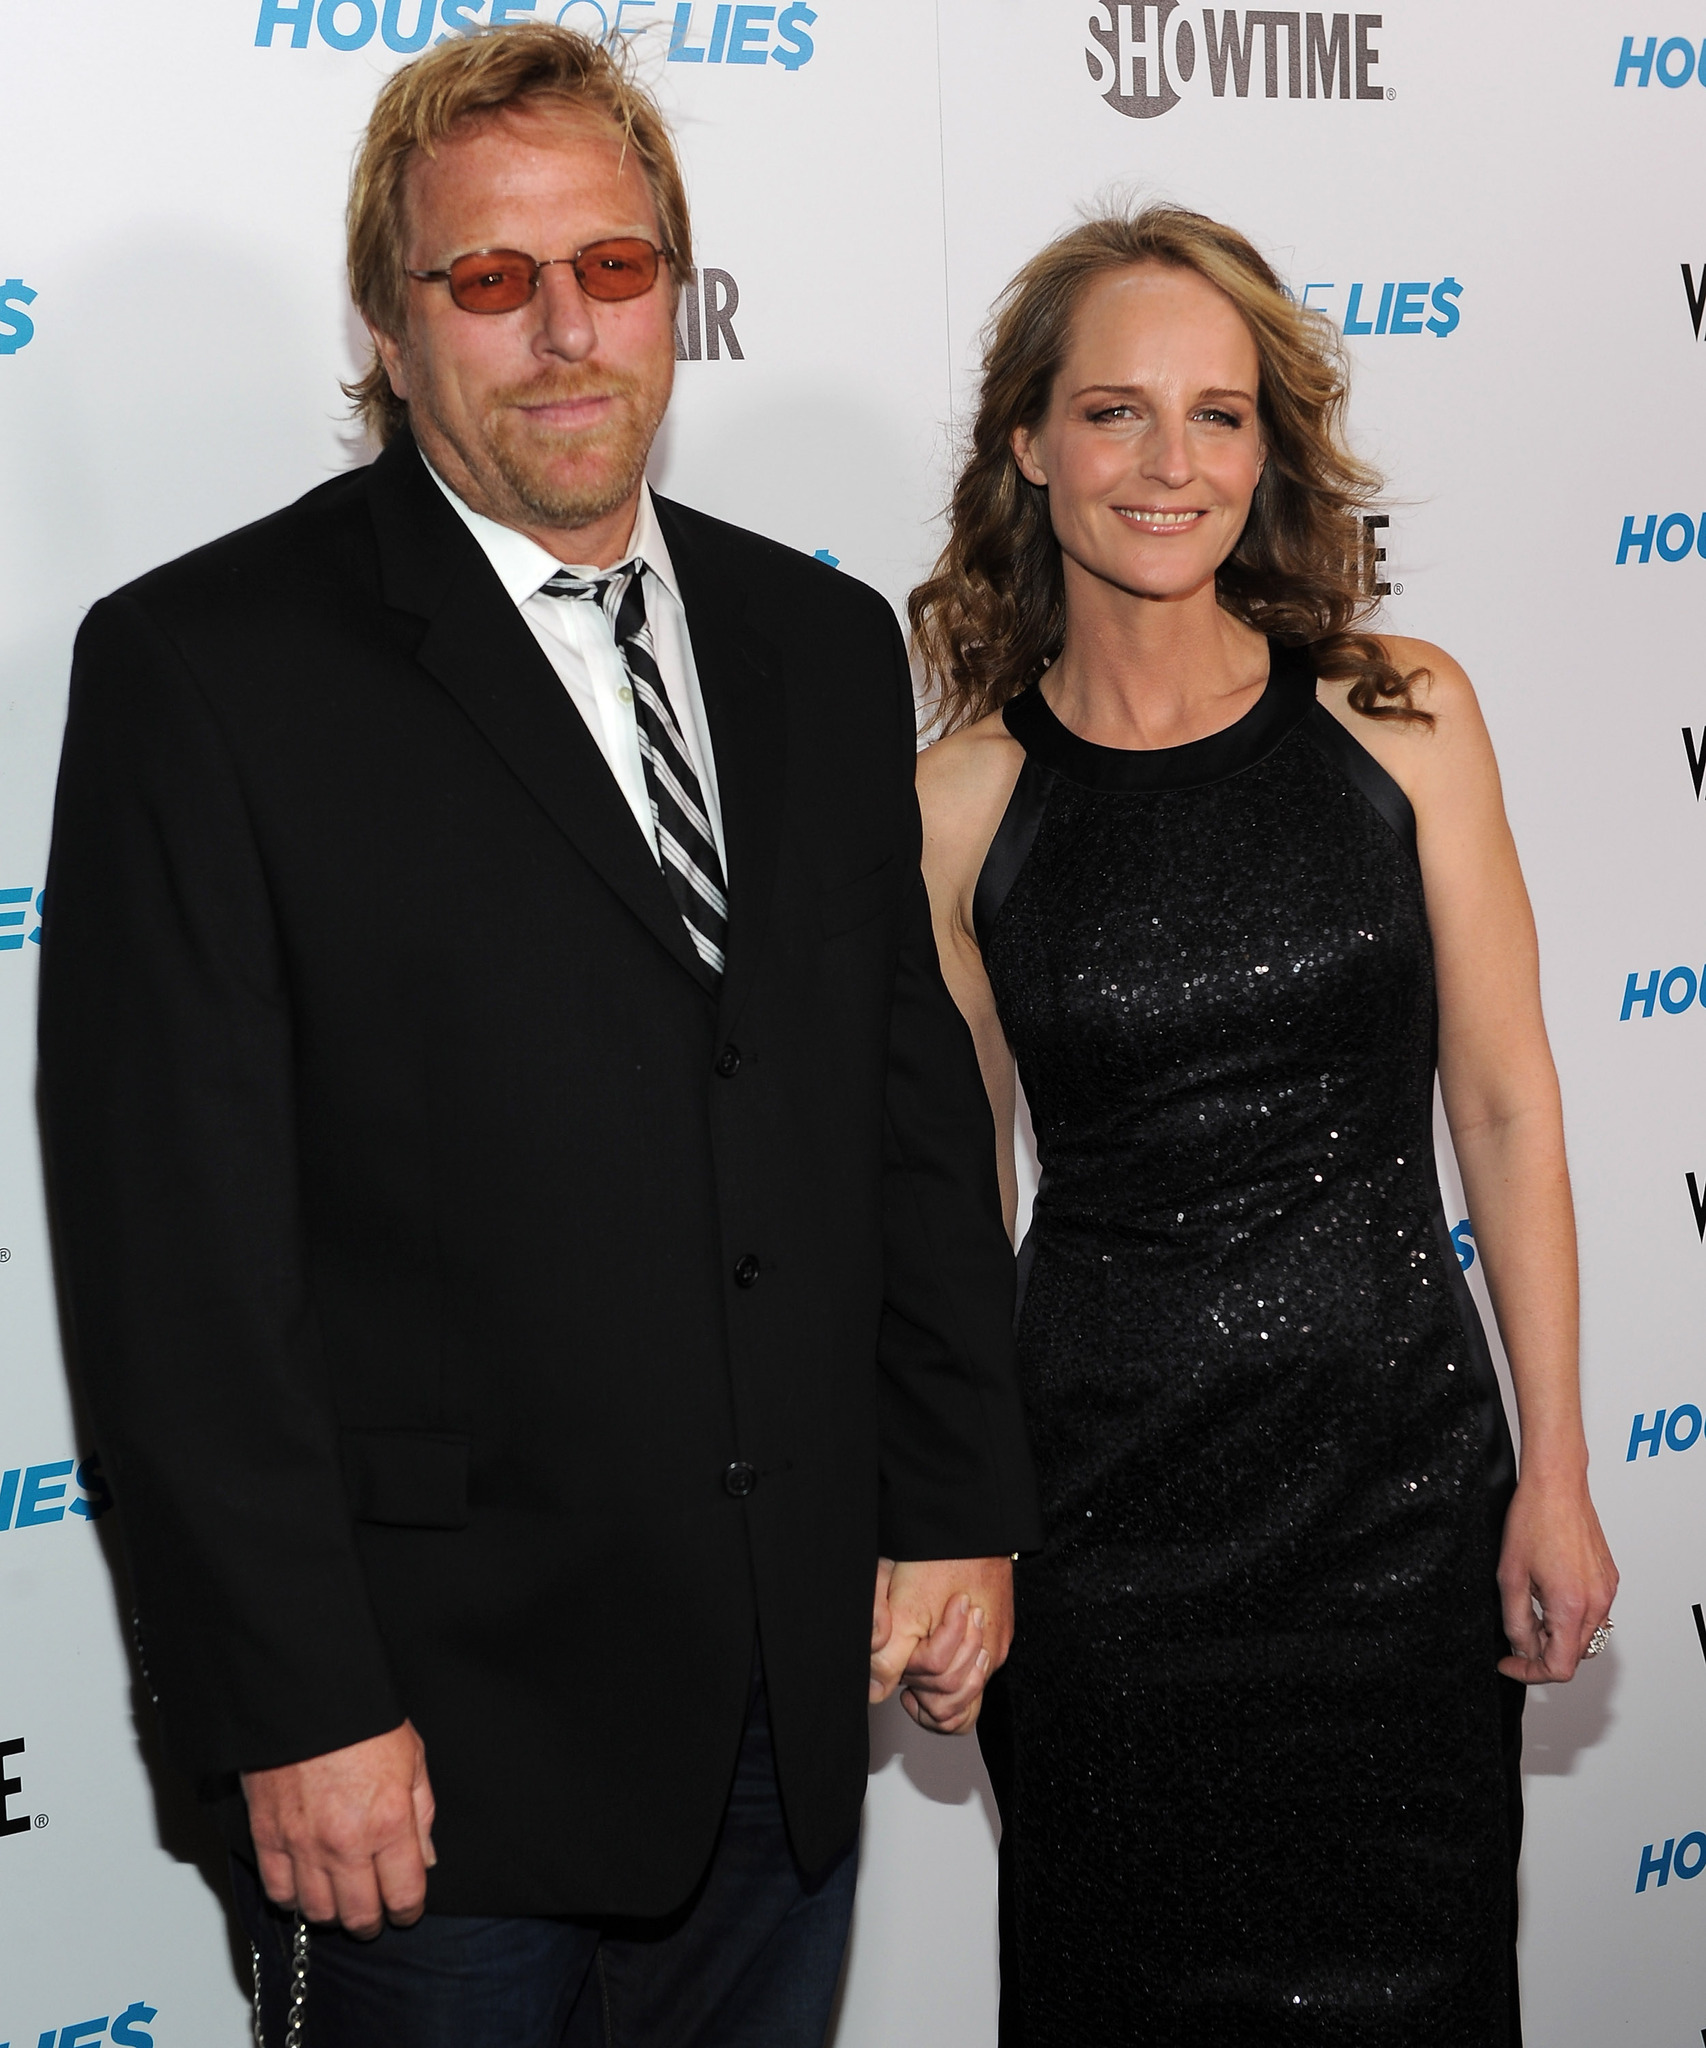 Helen Hunt and Matthew Carnahan at event of House of Lies (2012)